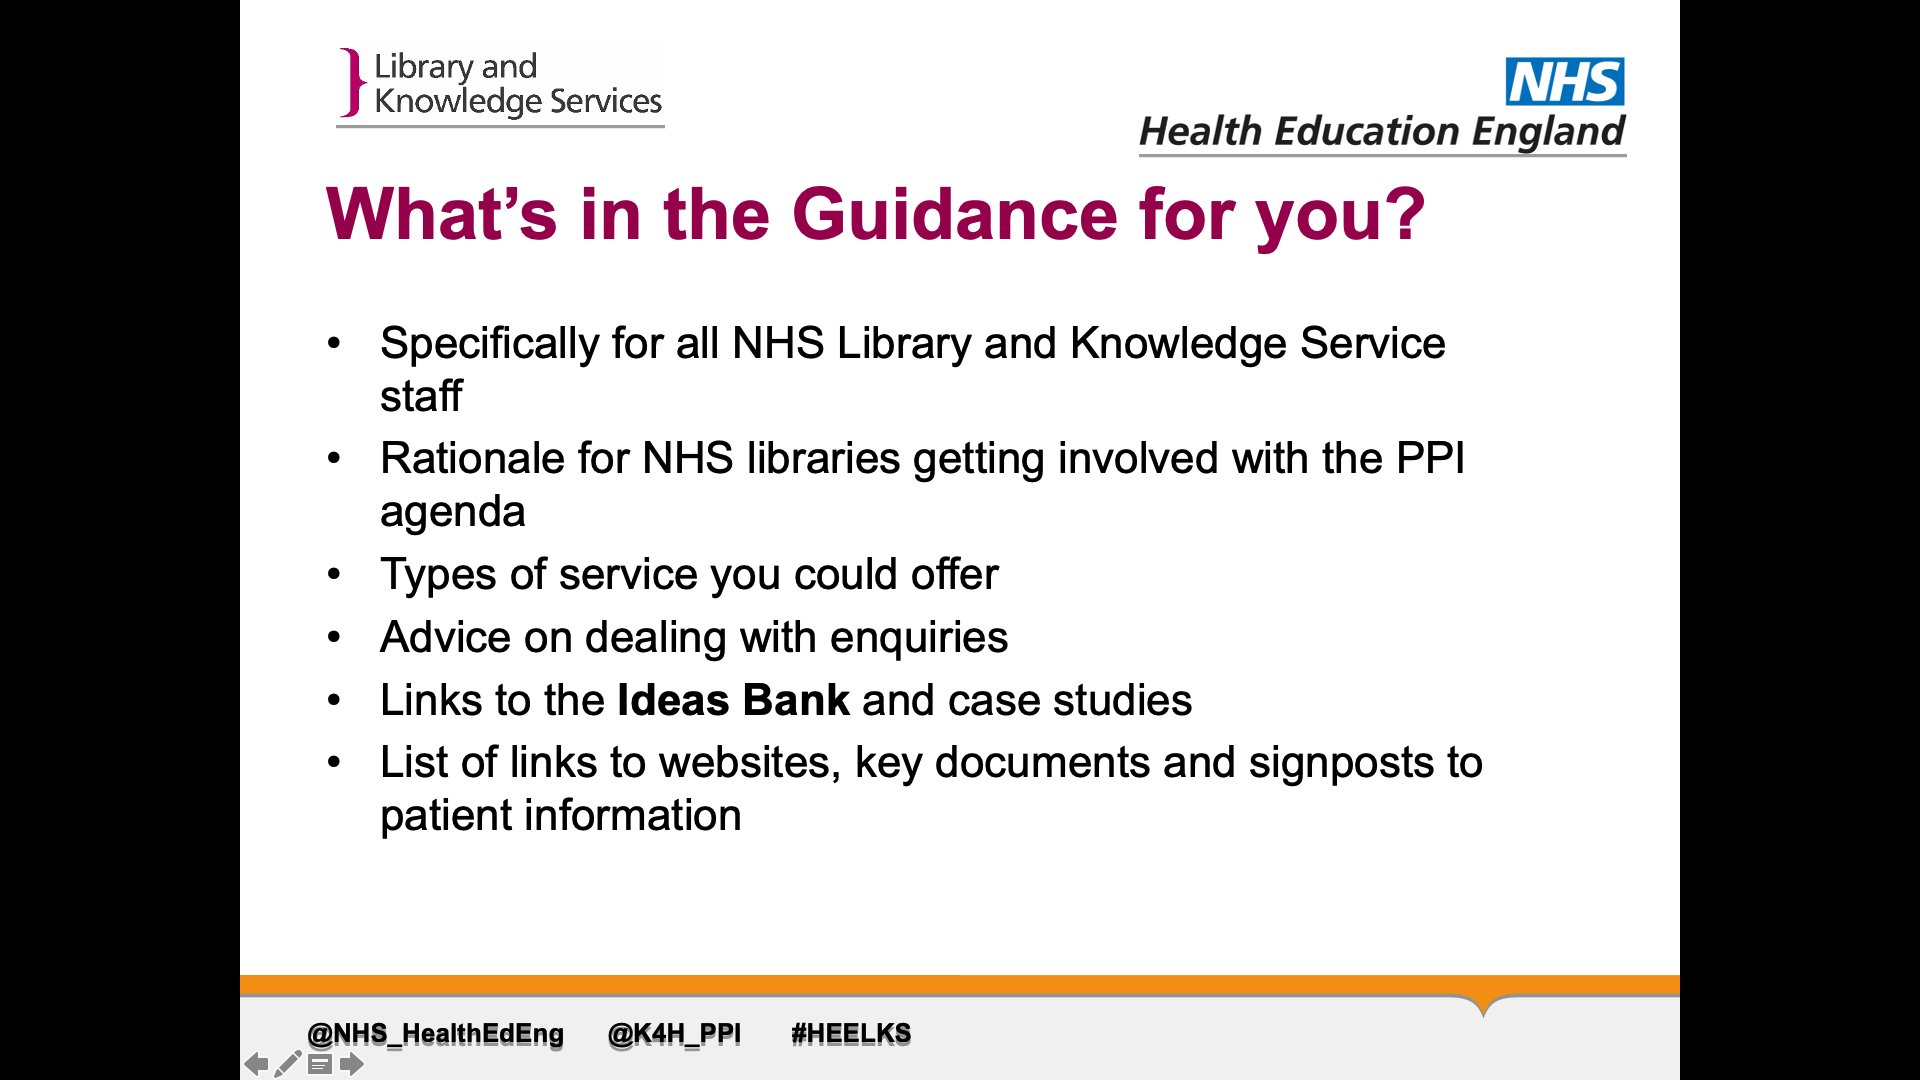 Title: What’s in the Guidance for you? Text on page: 1. Specifically for all NHS Library and Knowledge Service staff 2. Rationale for NHS libraries getting involved with the PPI agenda 3. Types of service you could offer 4. Advice on dealing with enquiries 5. Links to the Ideas Bank and case studies 6. List of links to websites, key documents and signposts to patient information